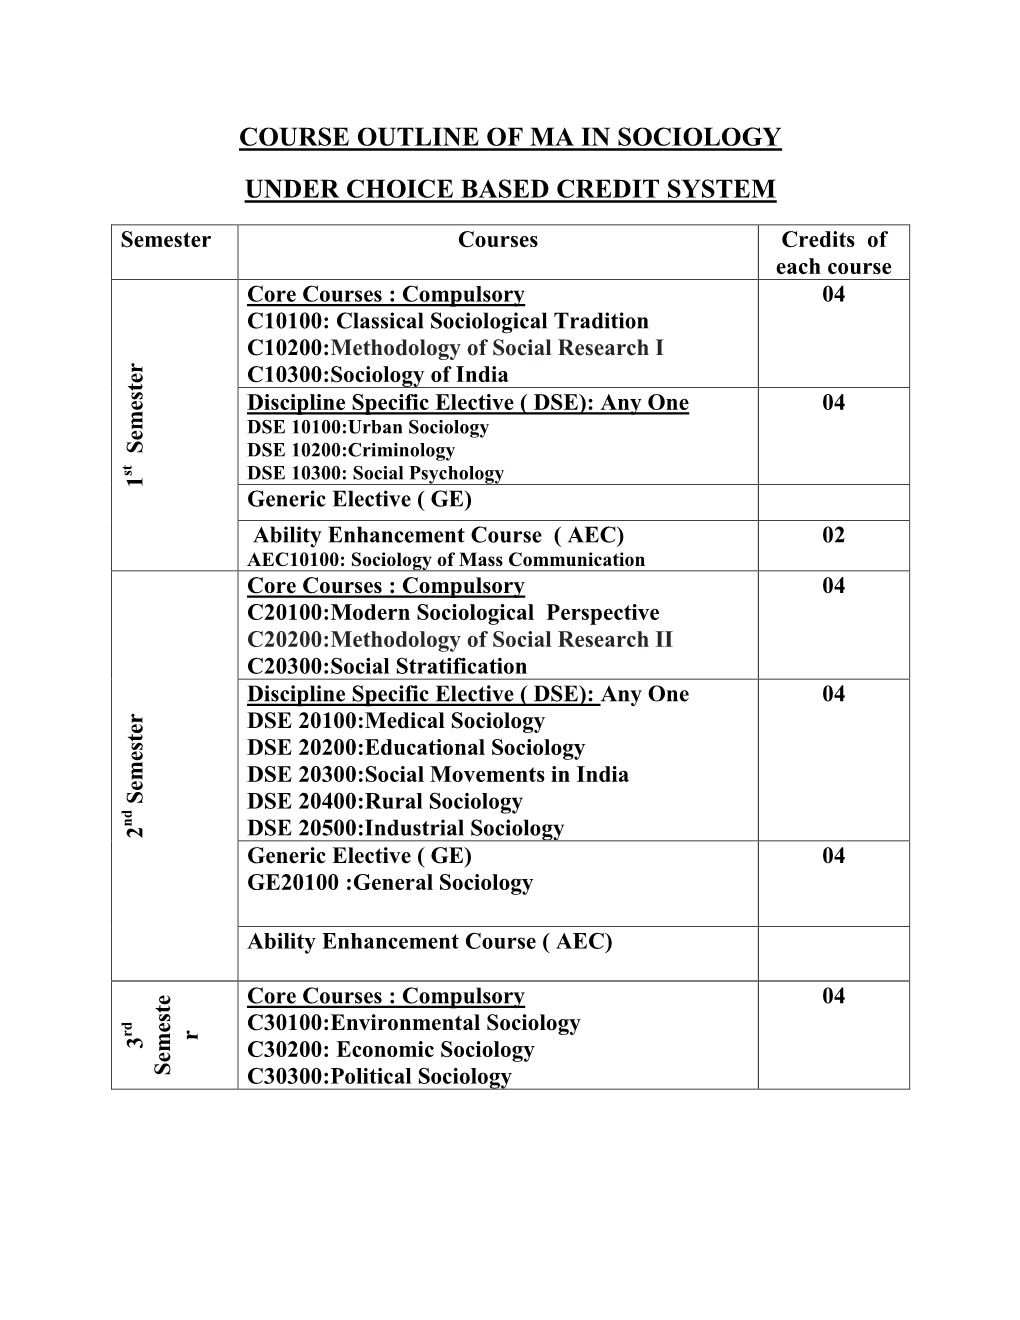 Course Outline of Ma in Sociology Under Choice Based Credit System